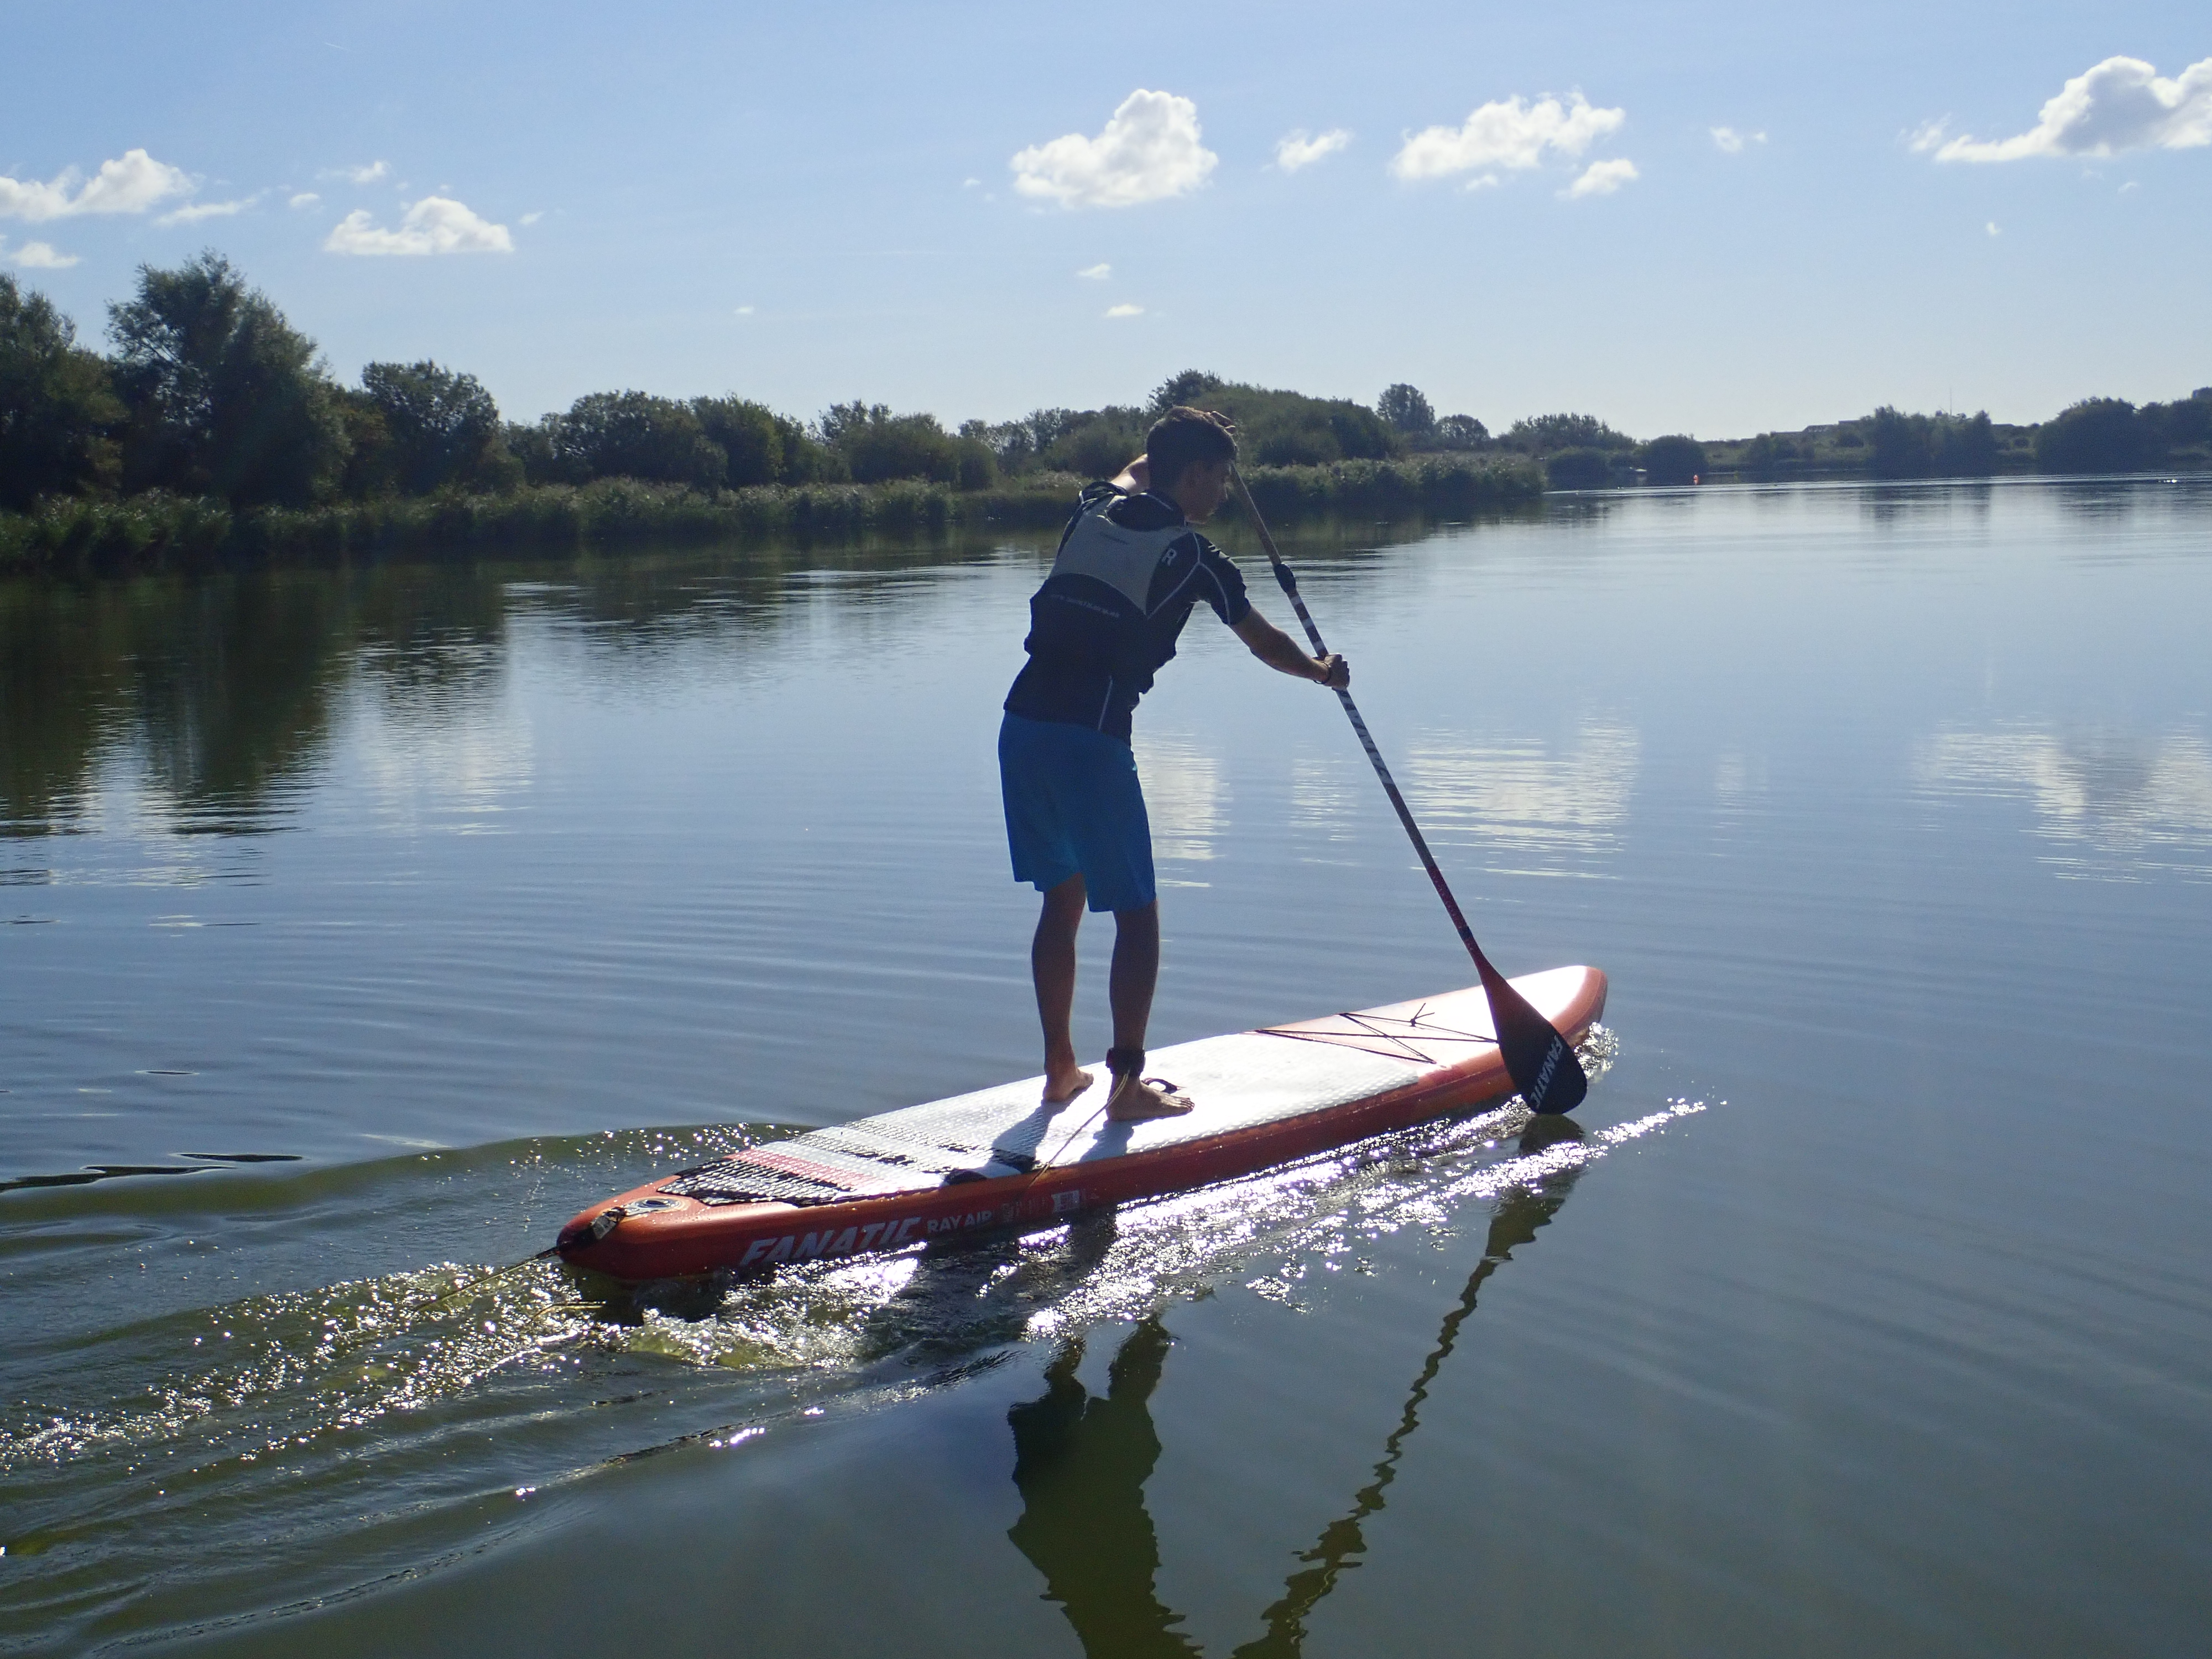 stand up paddle boarding on calm waters at rye watersports